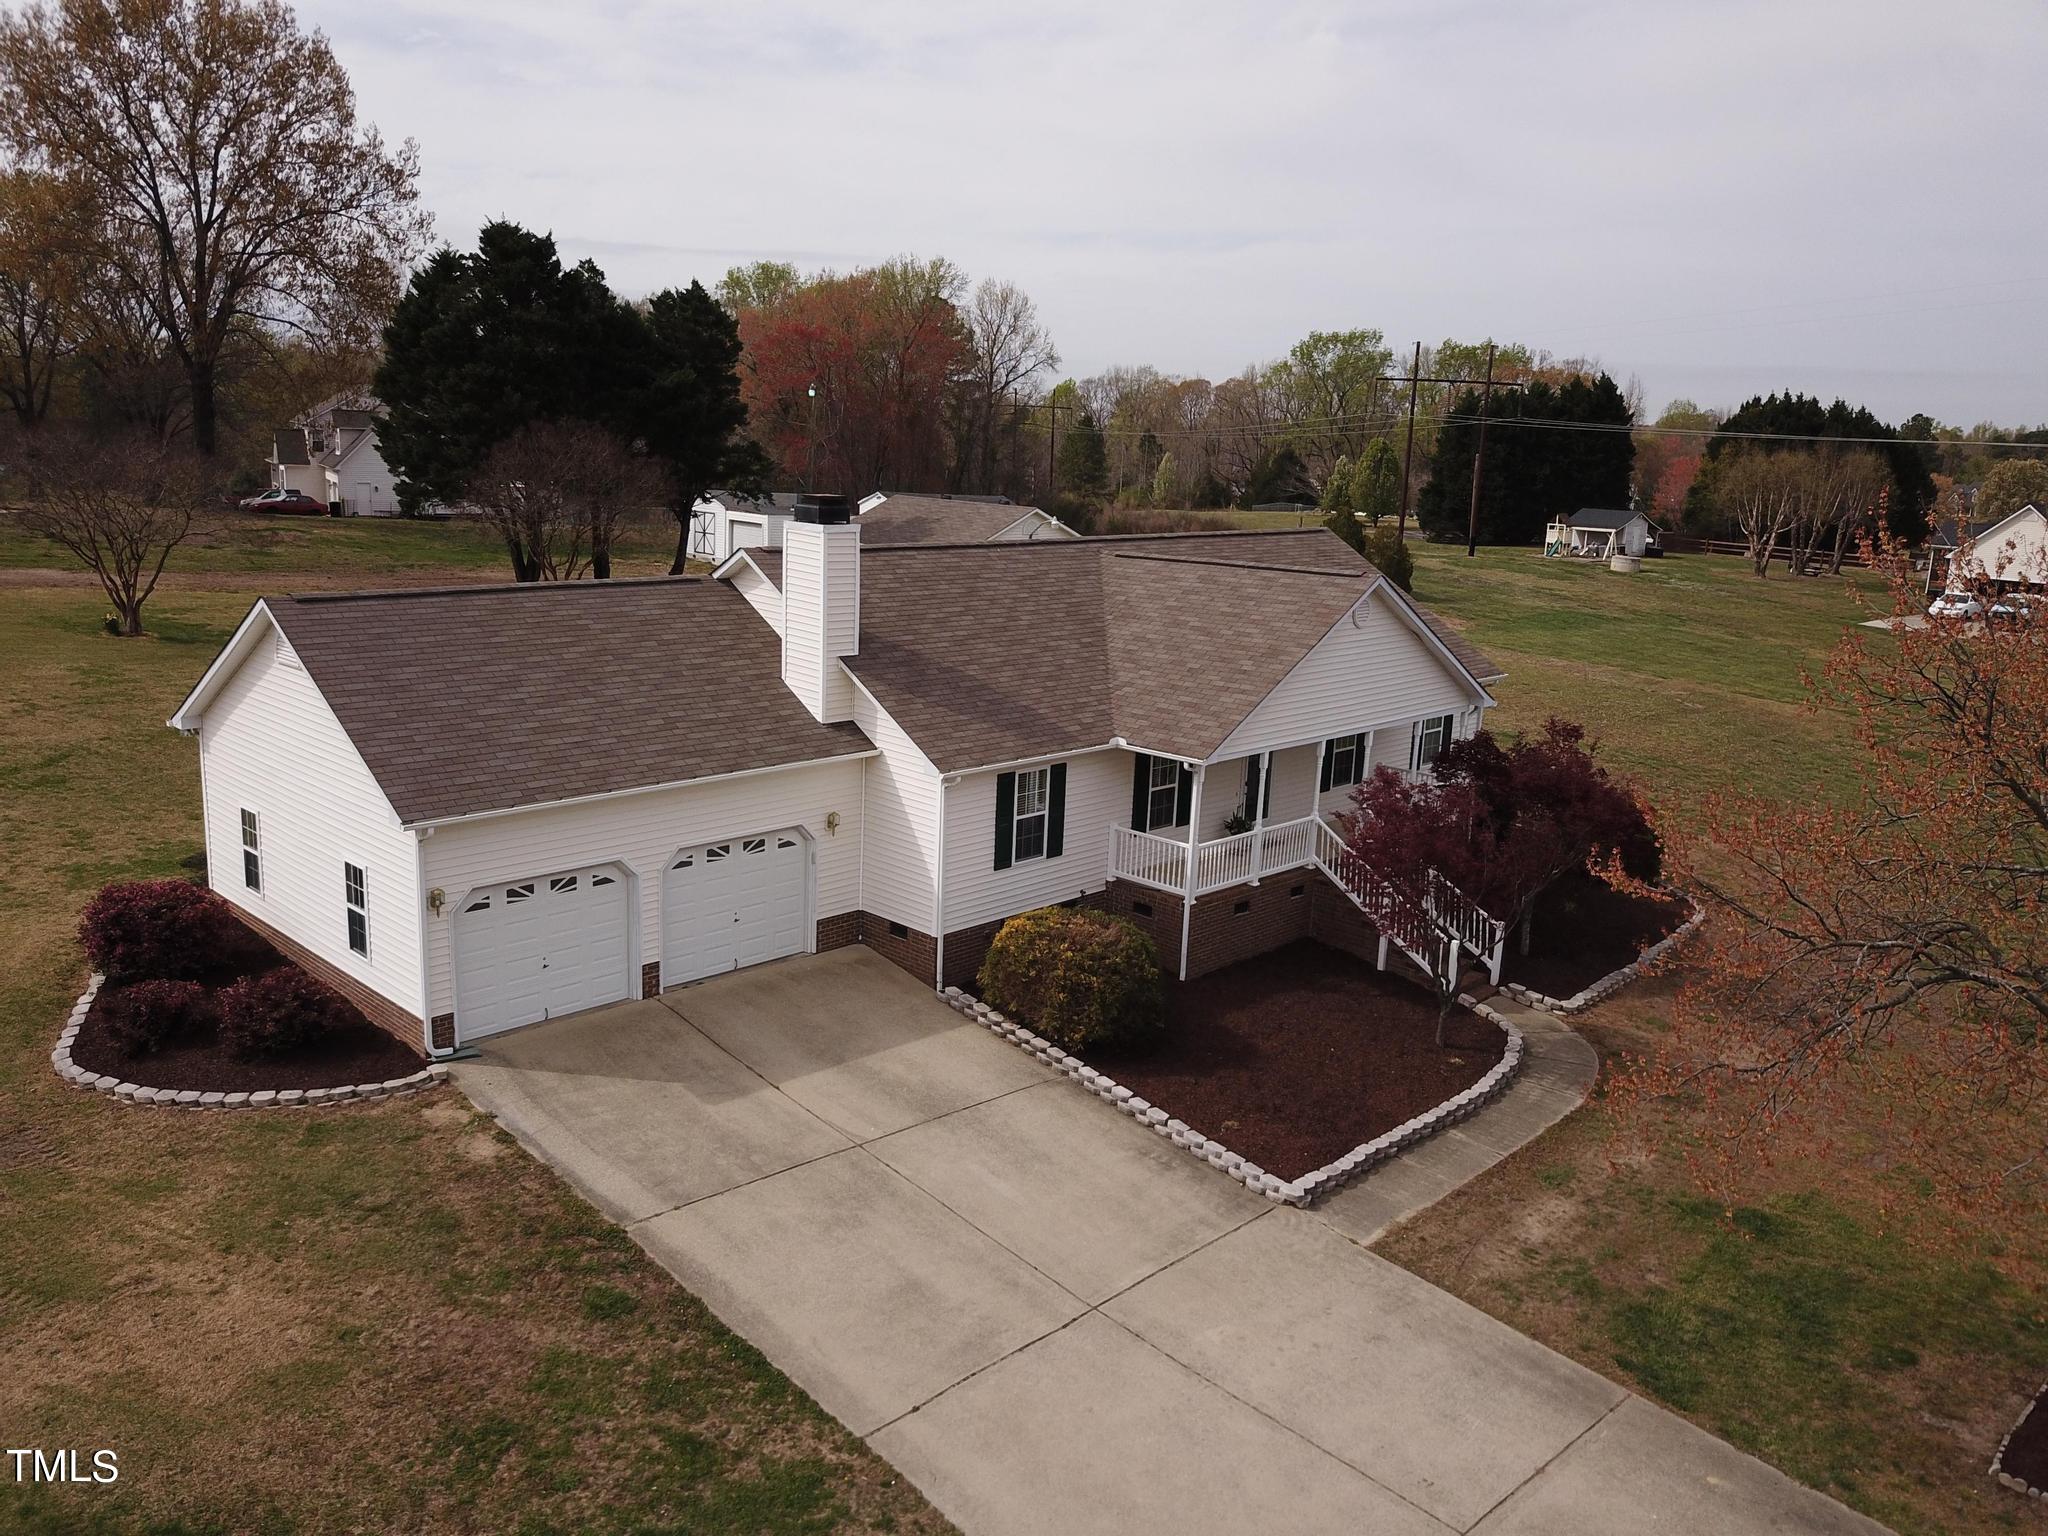 an aerial view of a house with yard and trees around